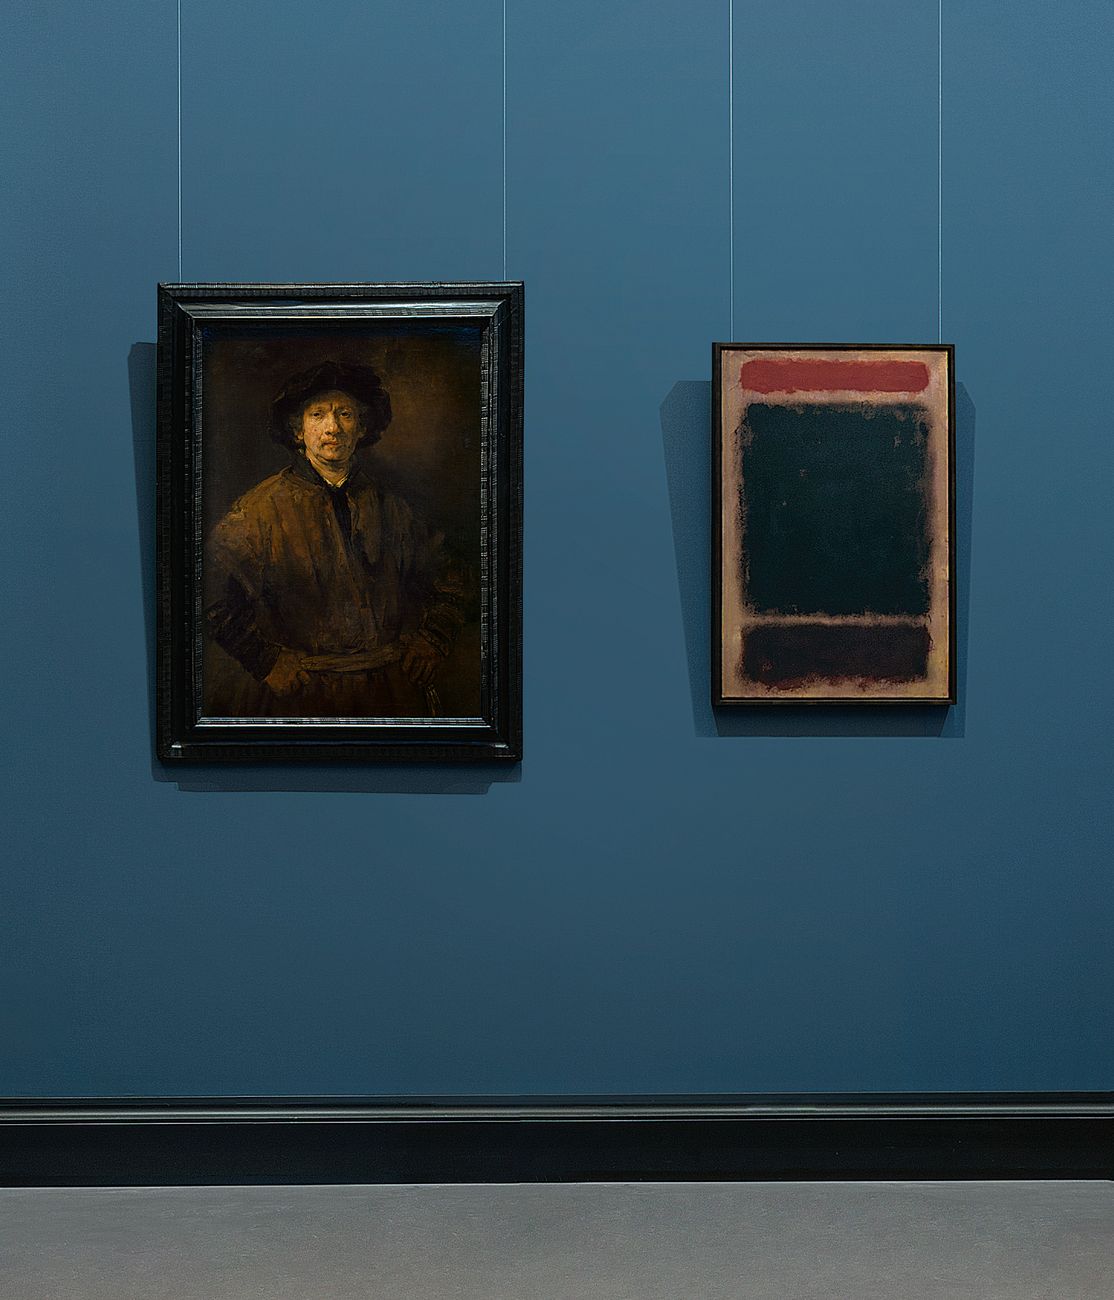 Rembrandt, Grande autoritratto, 1652 © KHM Museumsverband _ Mark Rothko, Untitled, 1959 60 © 2016 by Kate Rothko Prizel and Christopher Rothko